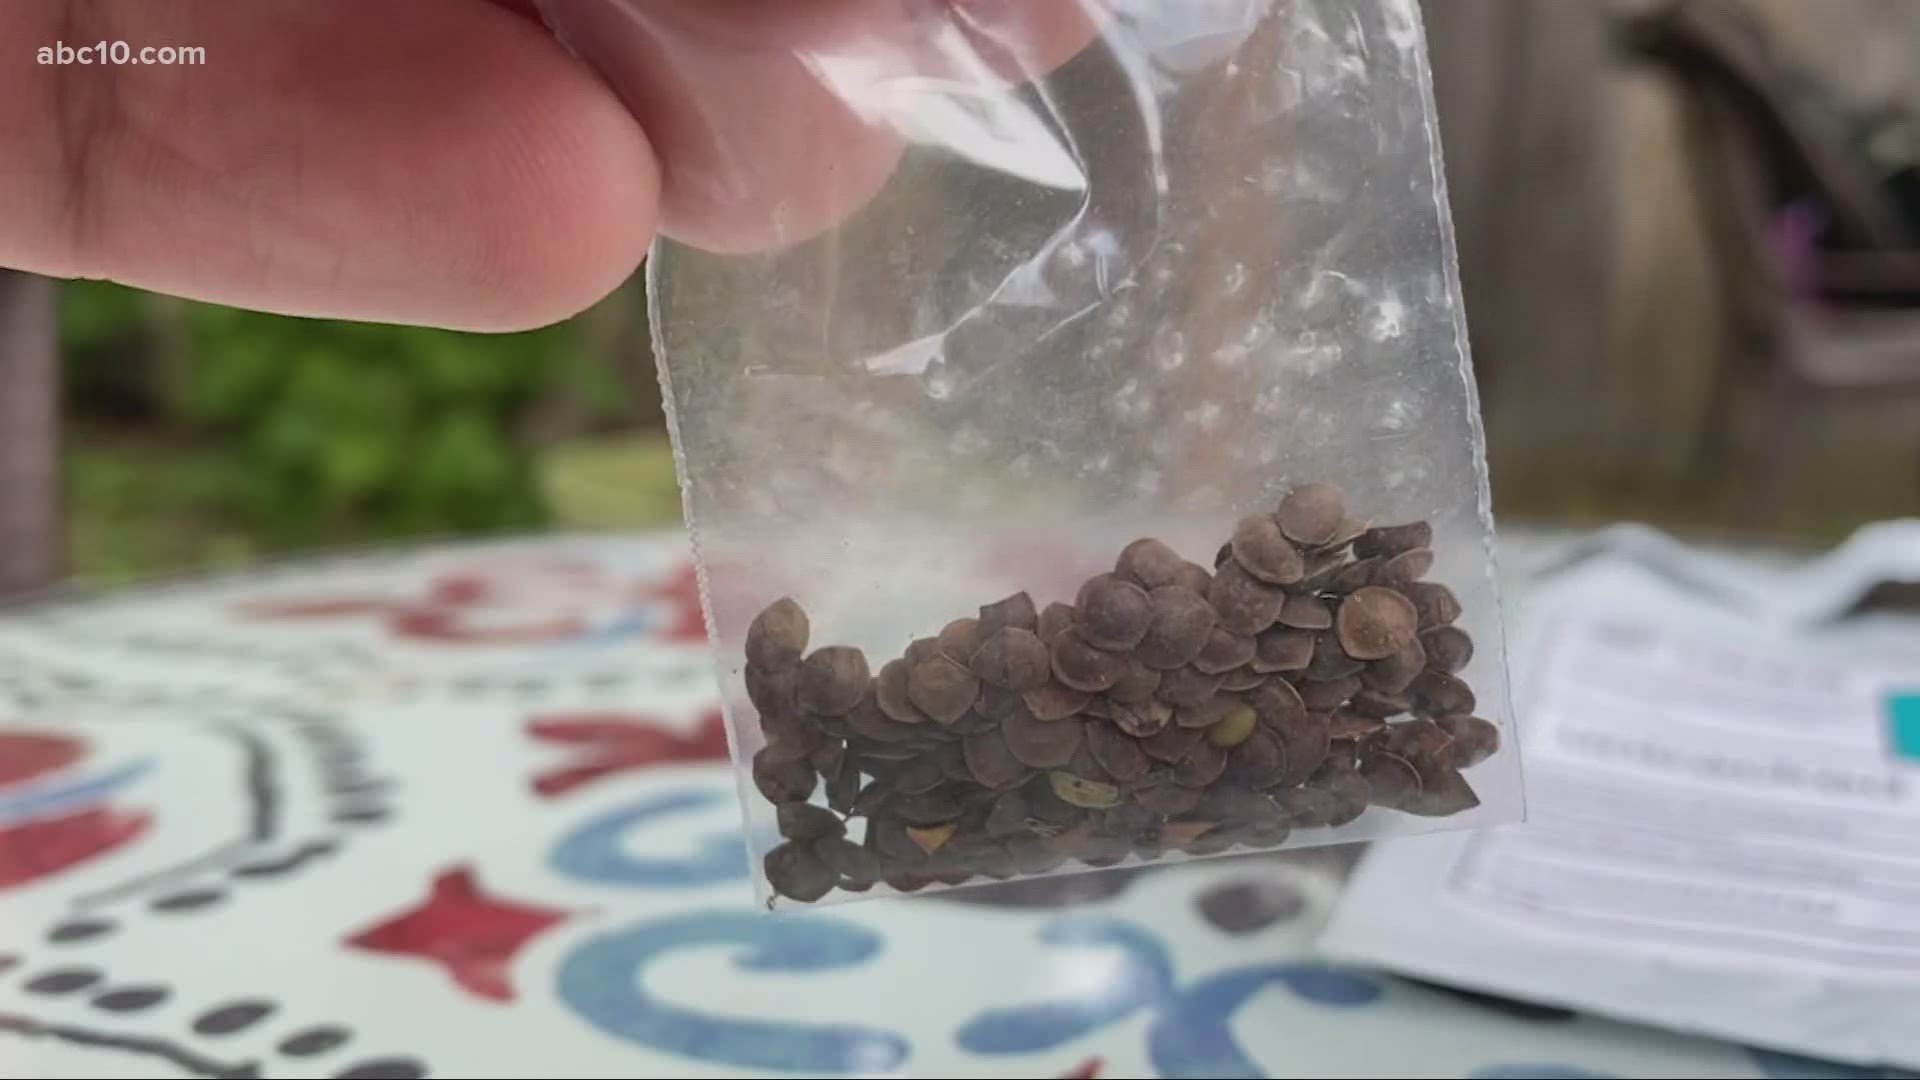 People across the country are reporting getting seeds they never ordered in their mailboxes. The USDA is testing them.